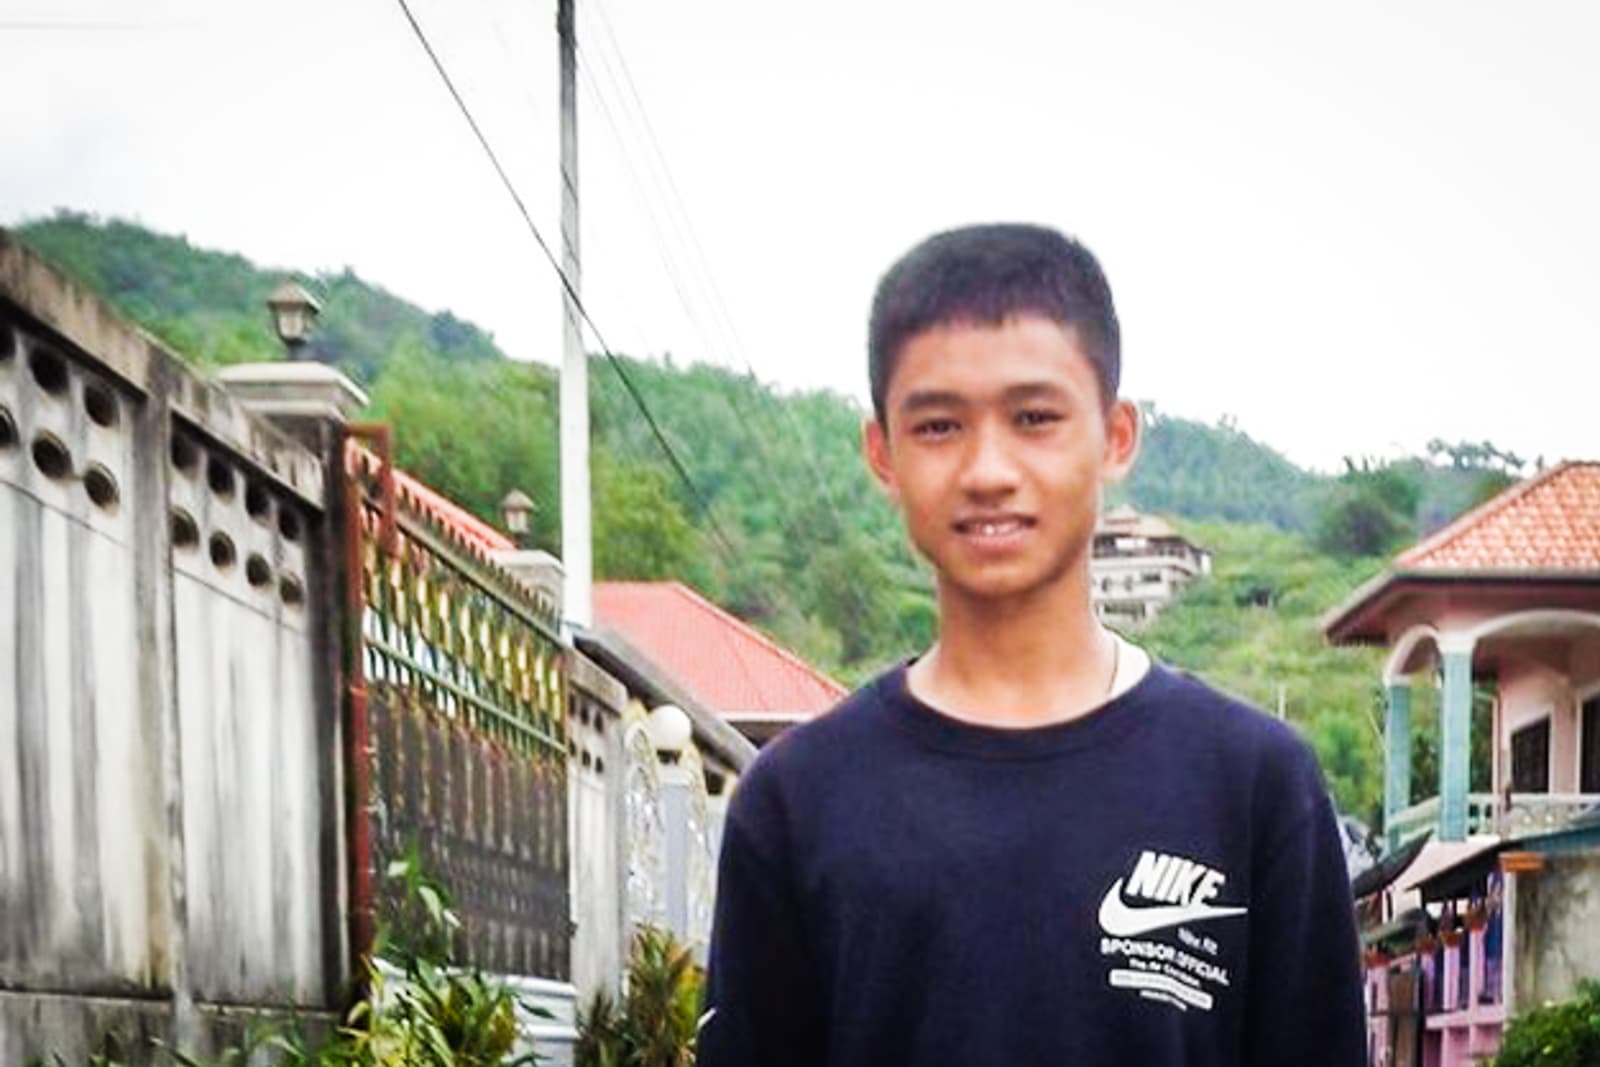 A boy is smiling, wearing a black Nike shirt. Behind him is a fence and a hill of green trees.